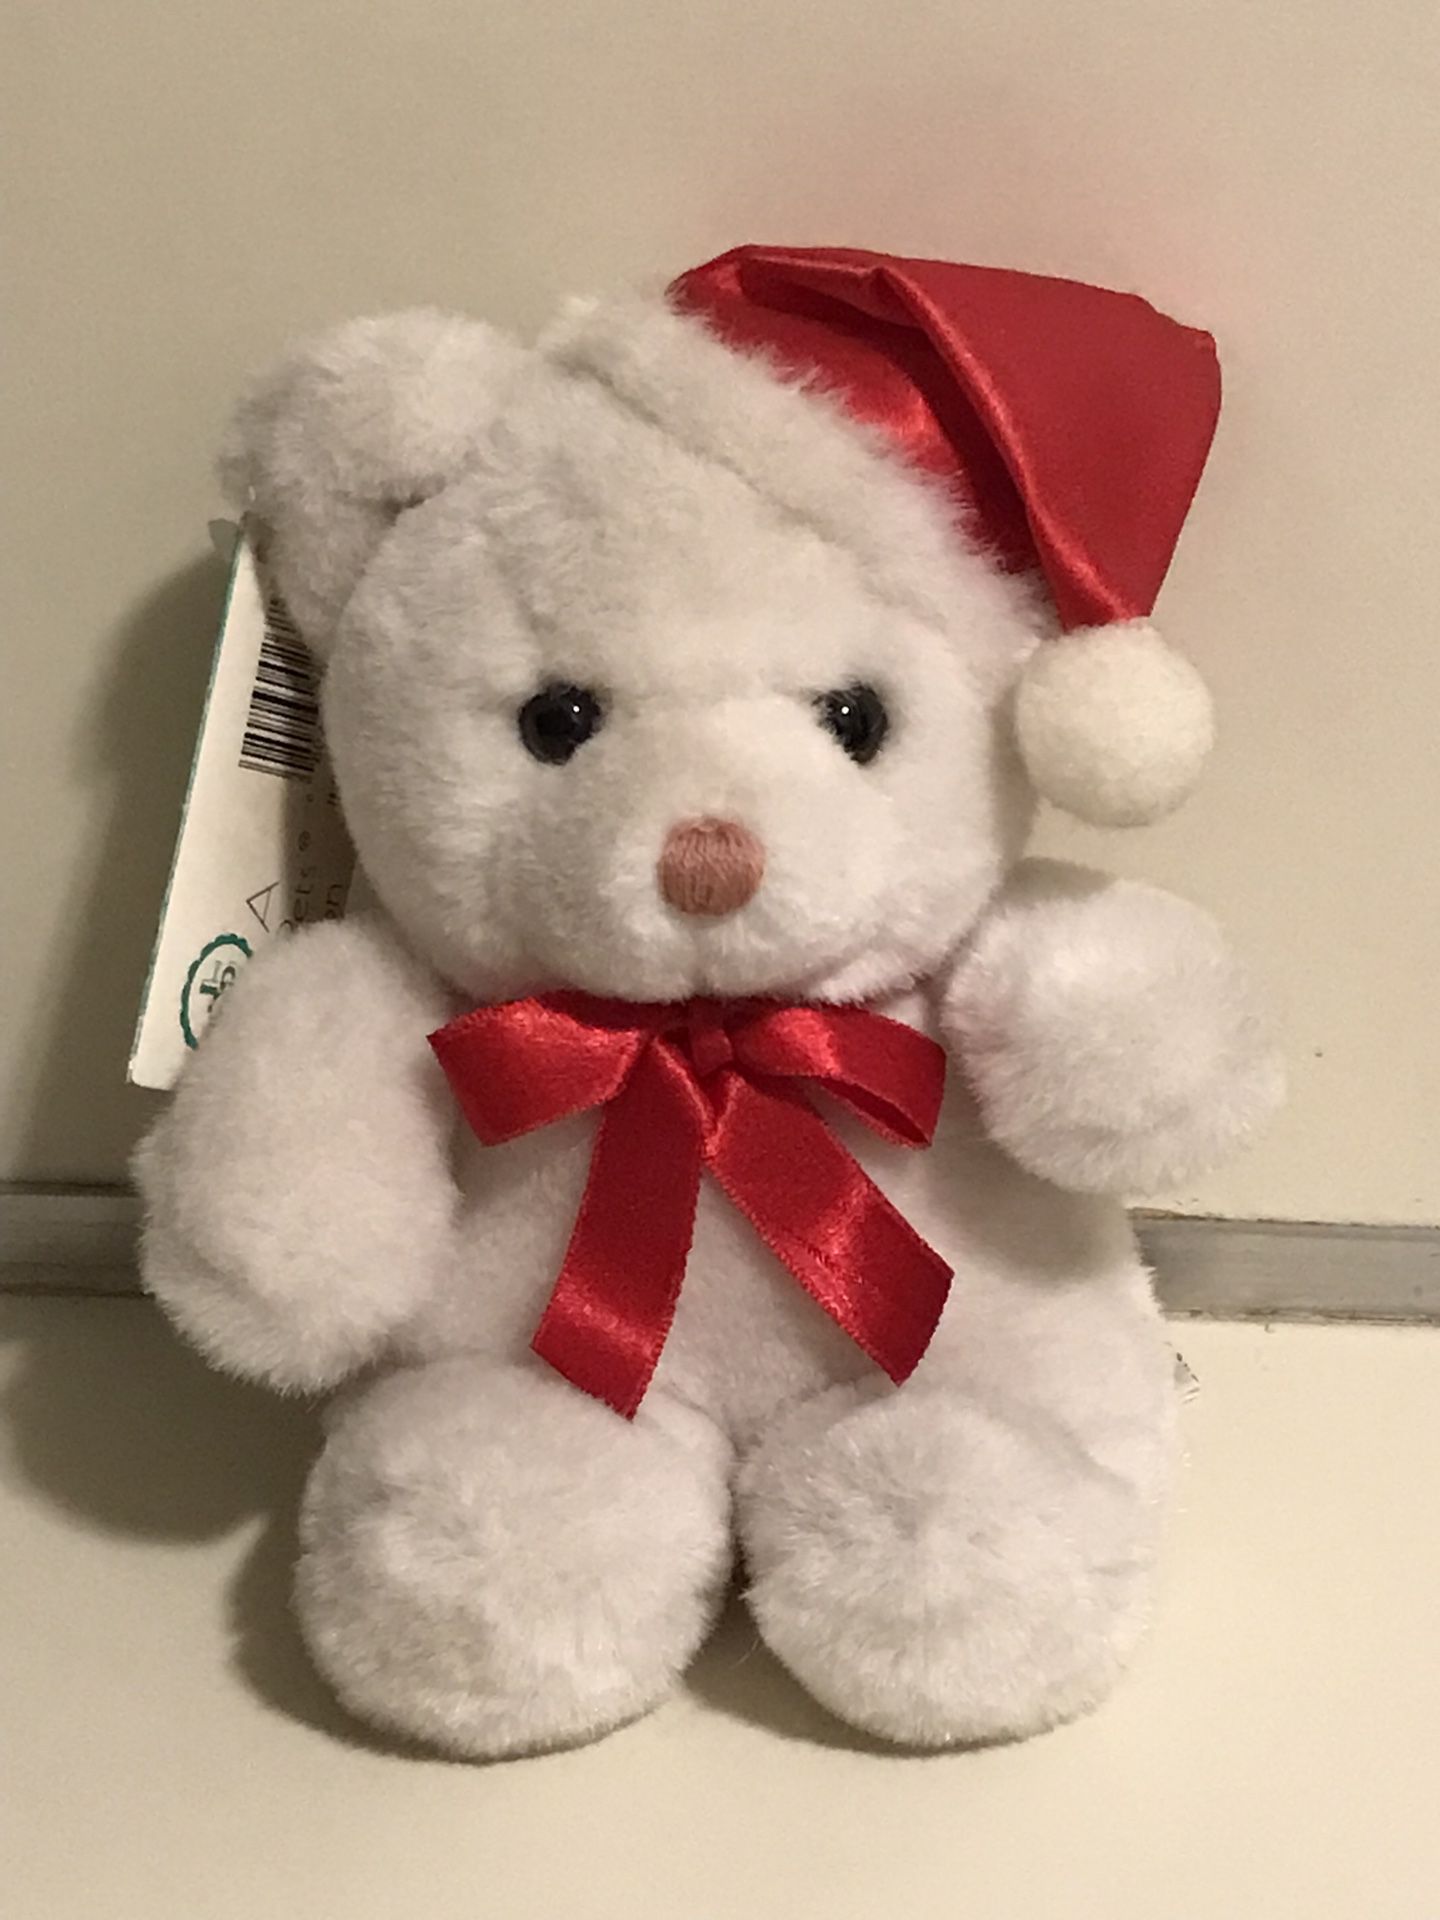 NEW Jerry Elsner Pets 7" White Jingle Bell Christmas Teddy Bear #2685